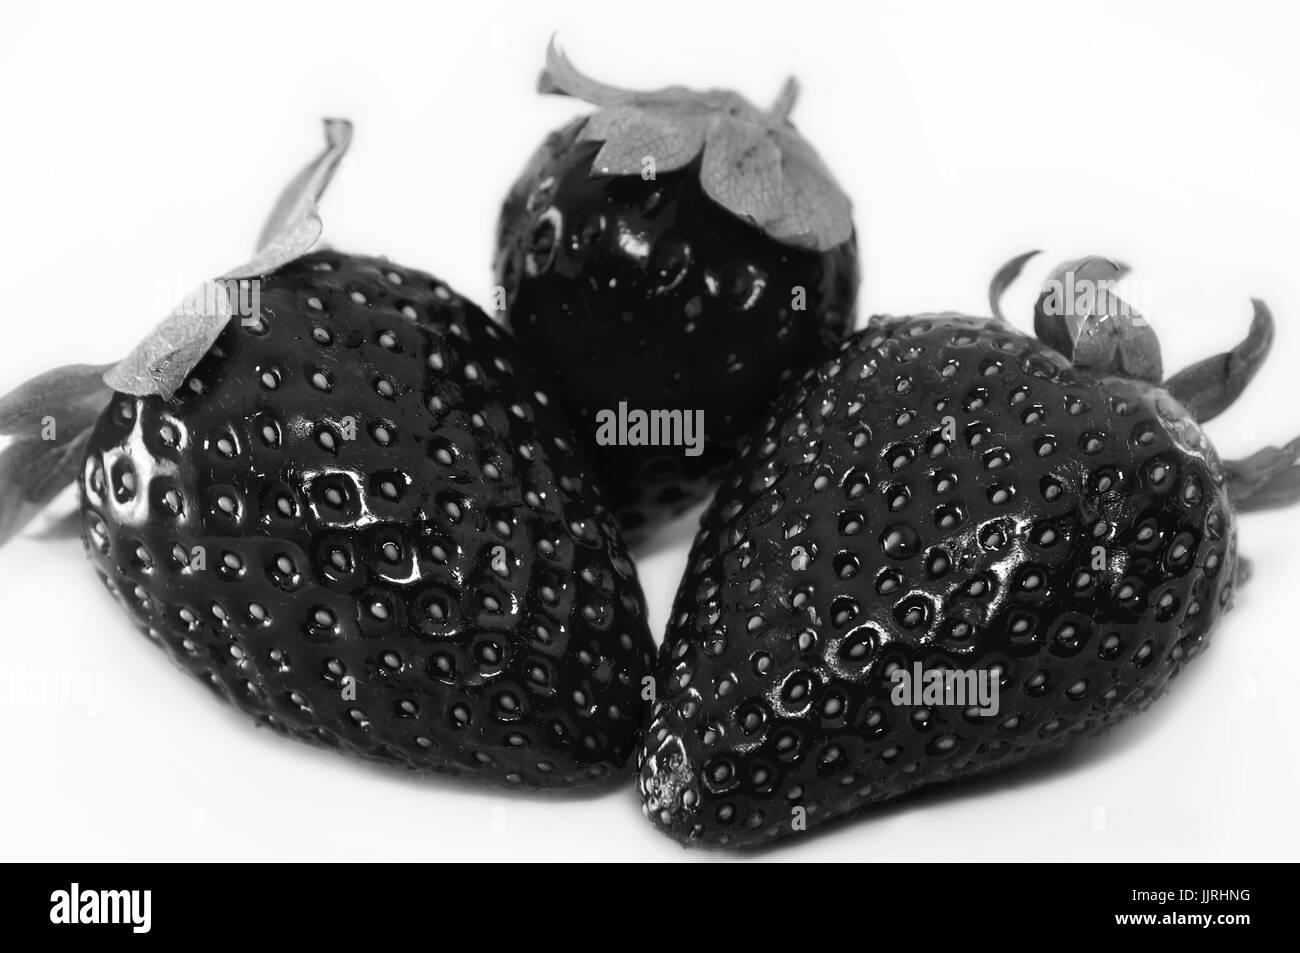 Closeup photo of some black strawberries with high contrast and a white background Stock Photo